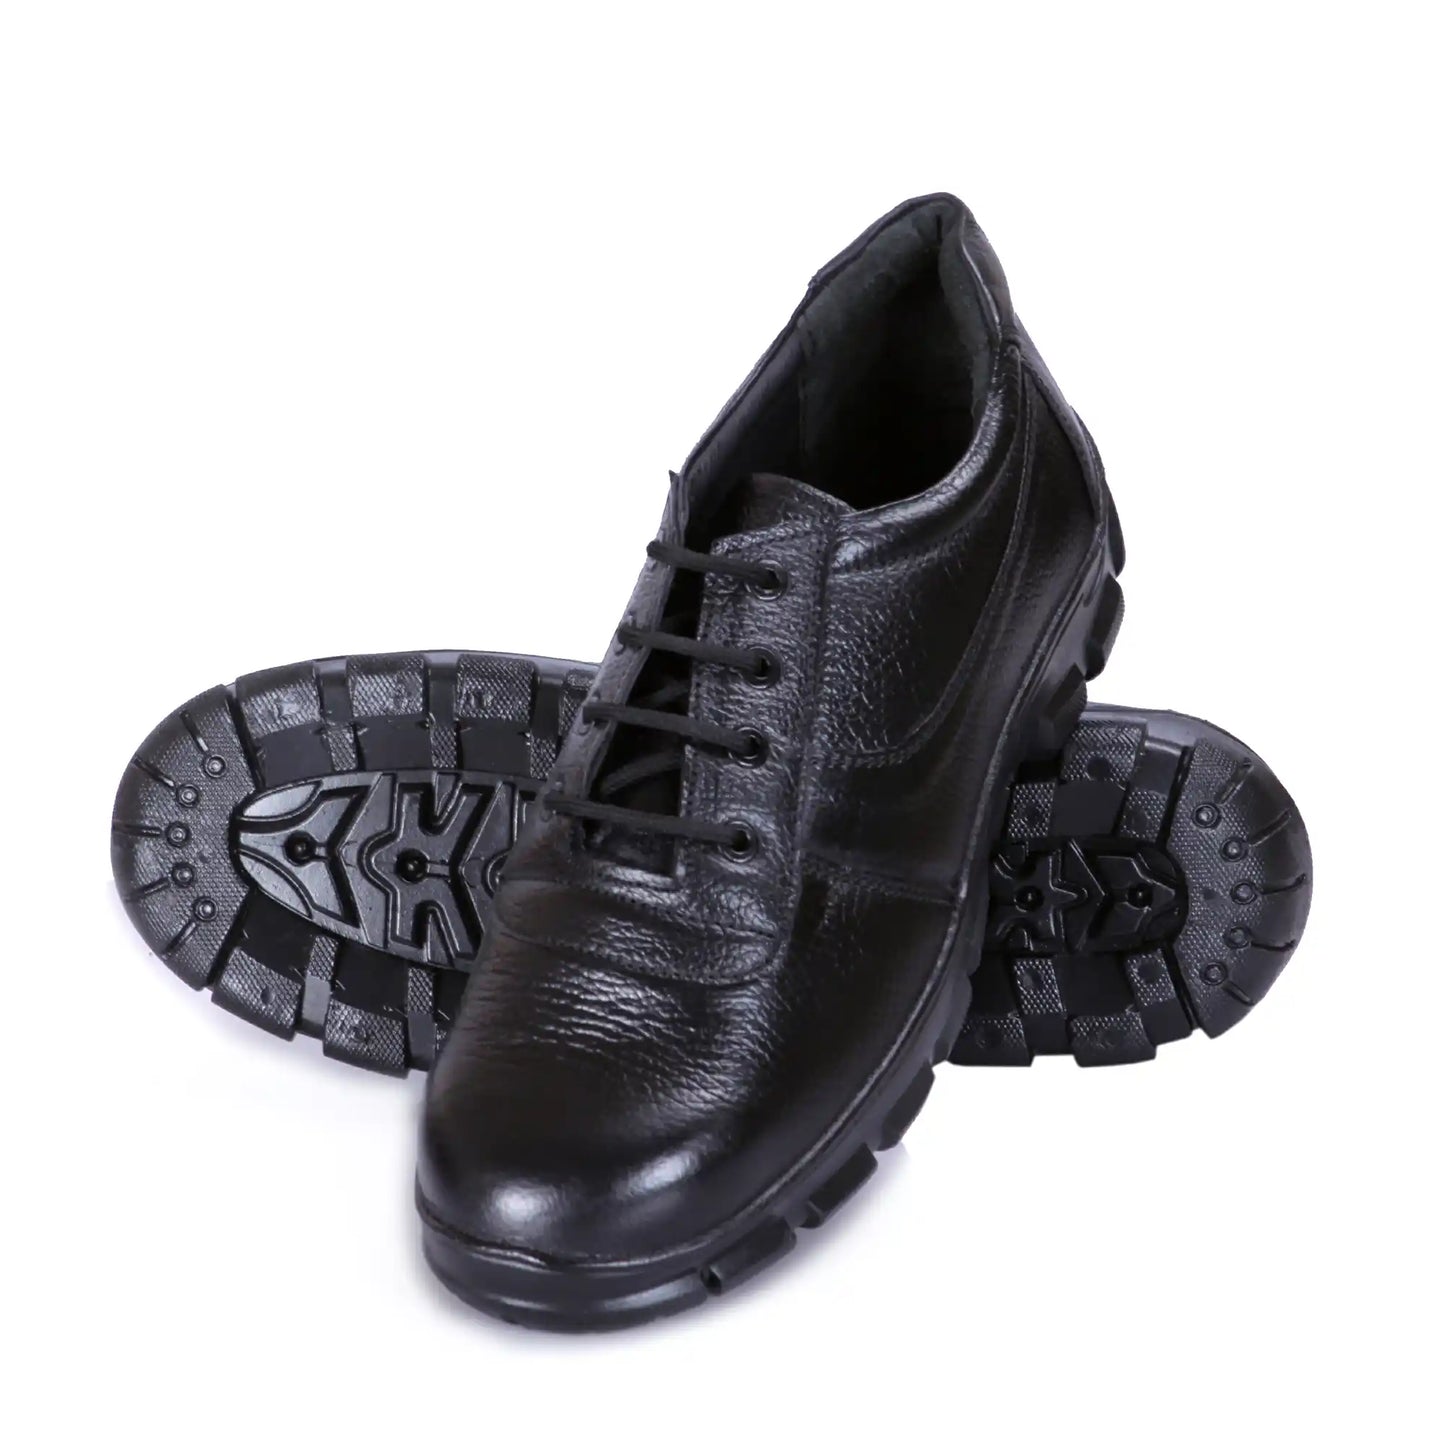 Genuine Leather Industrial Lace Up Safety Shoes for Men